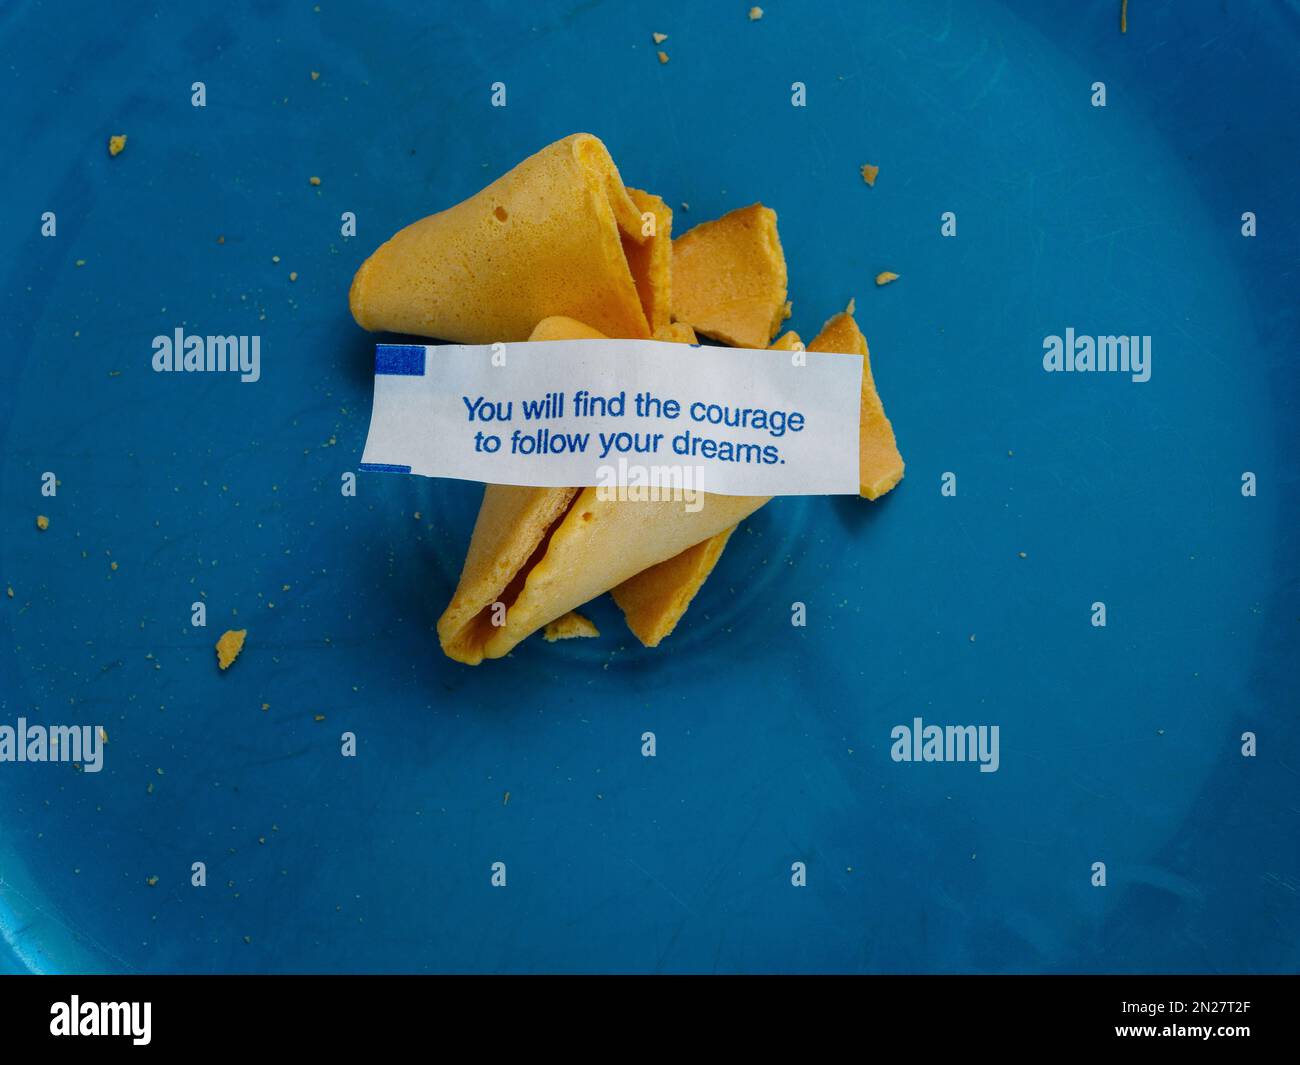 Fortune cookie positing you will find courage Stock Photo